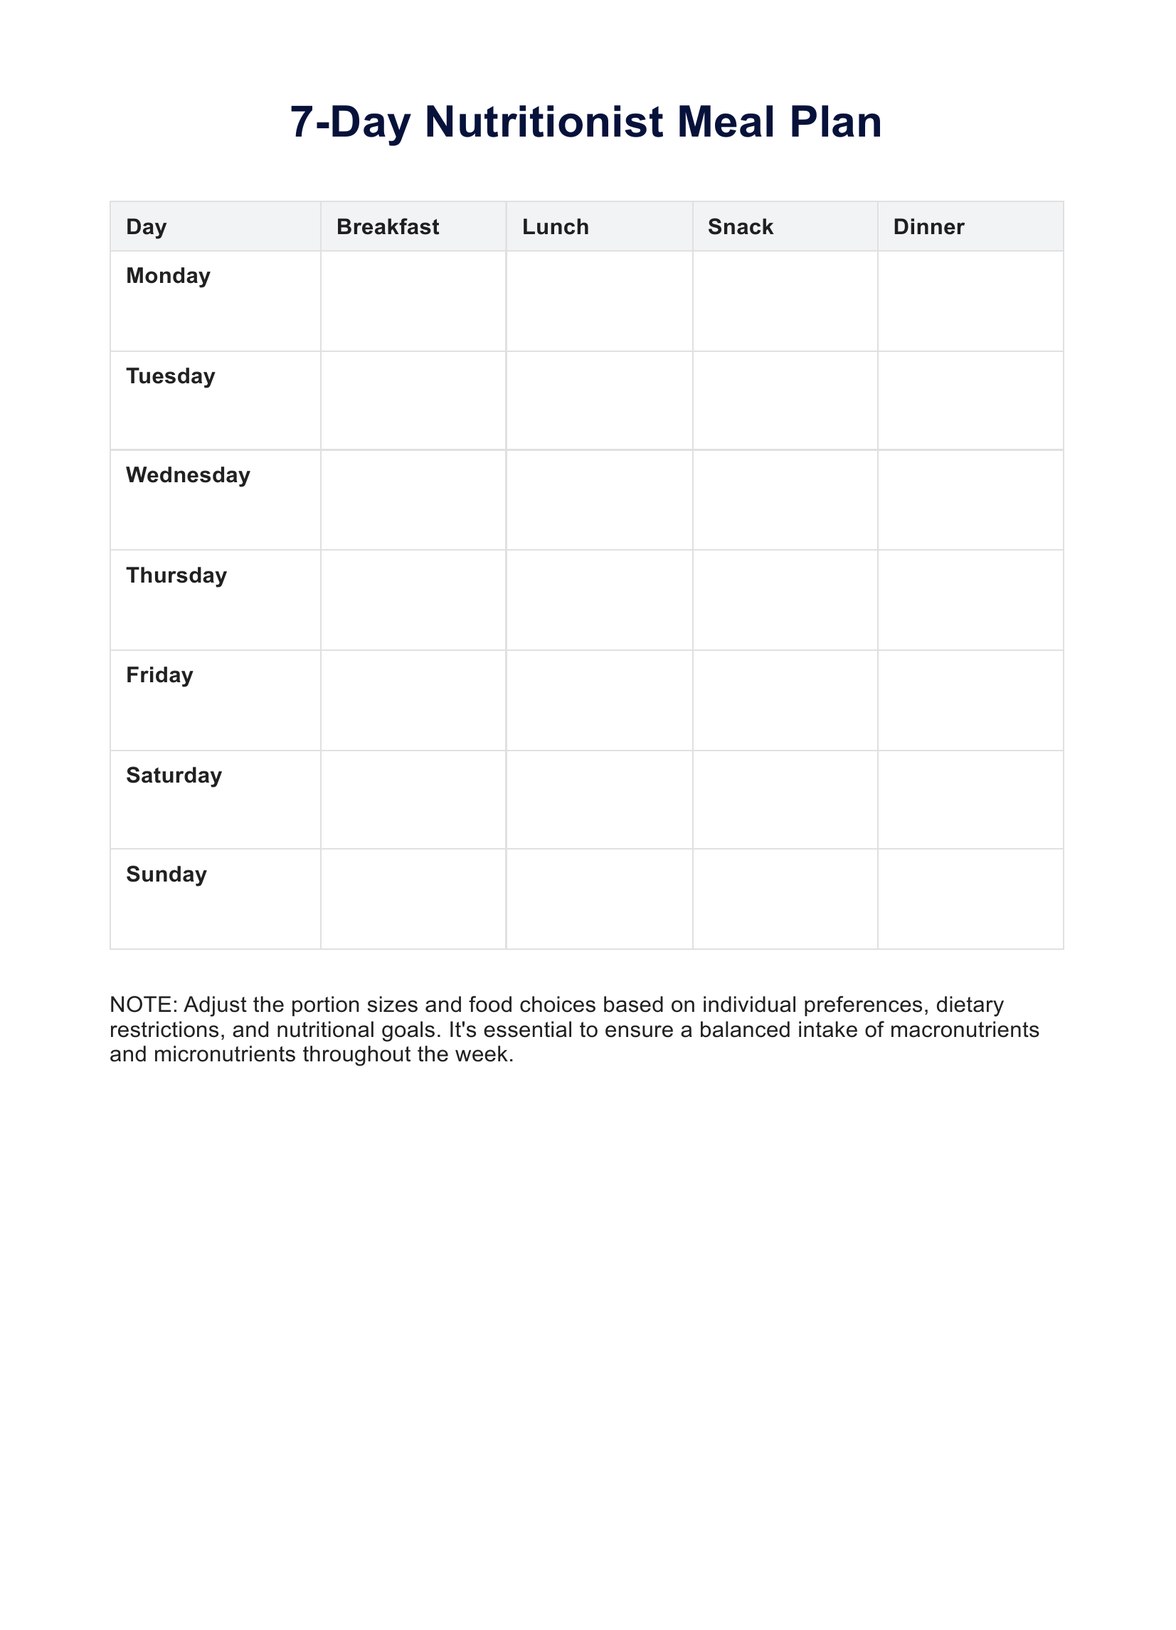 Nutritionist Meal Plan PDF Example